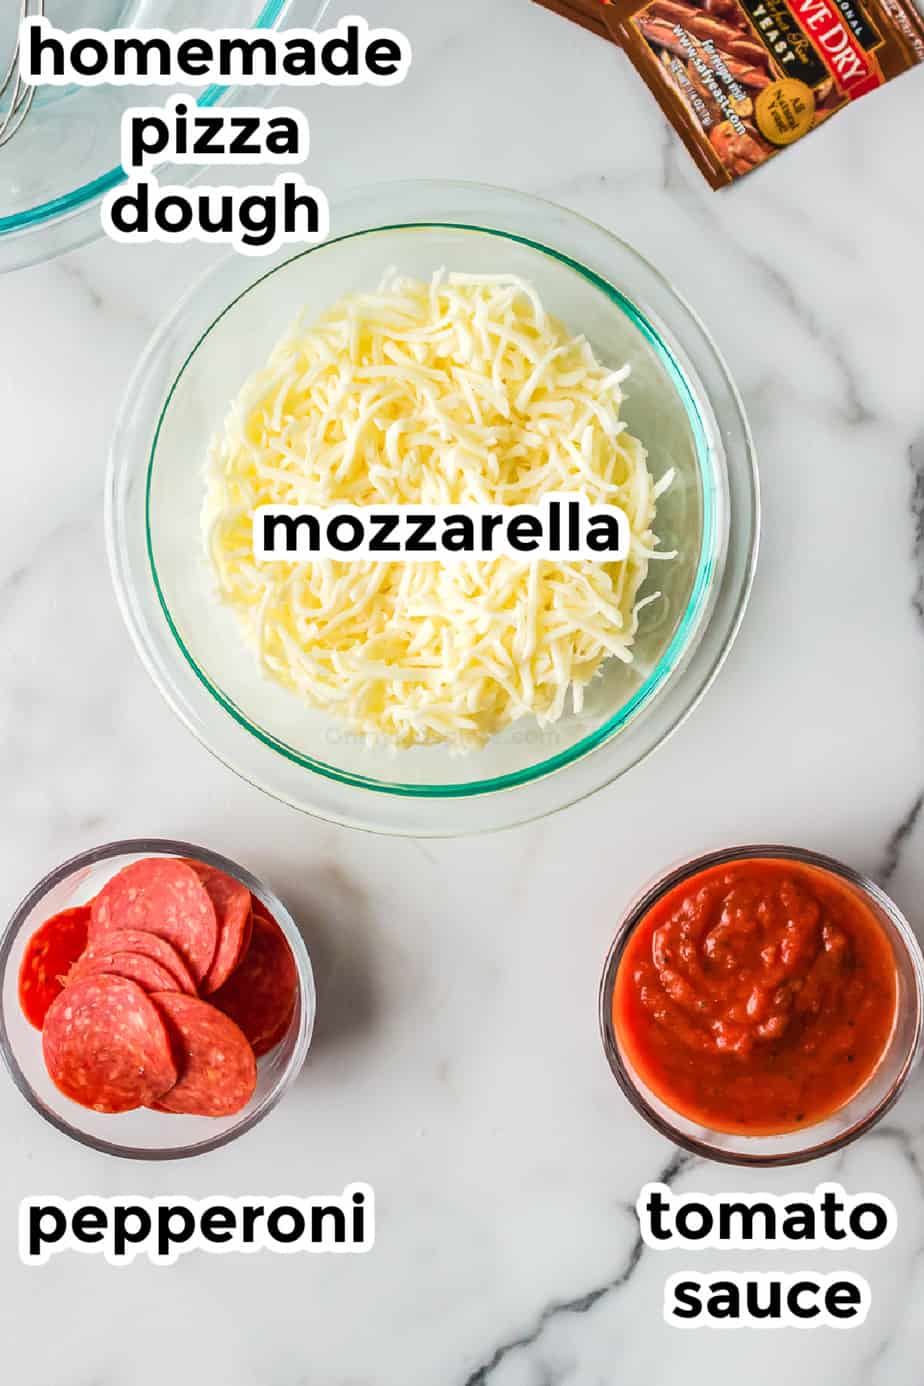 ingredients for pepperoni pizza with labels